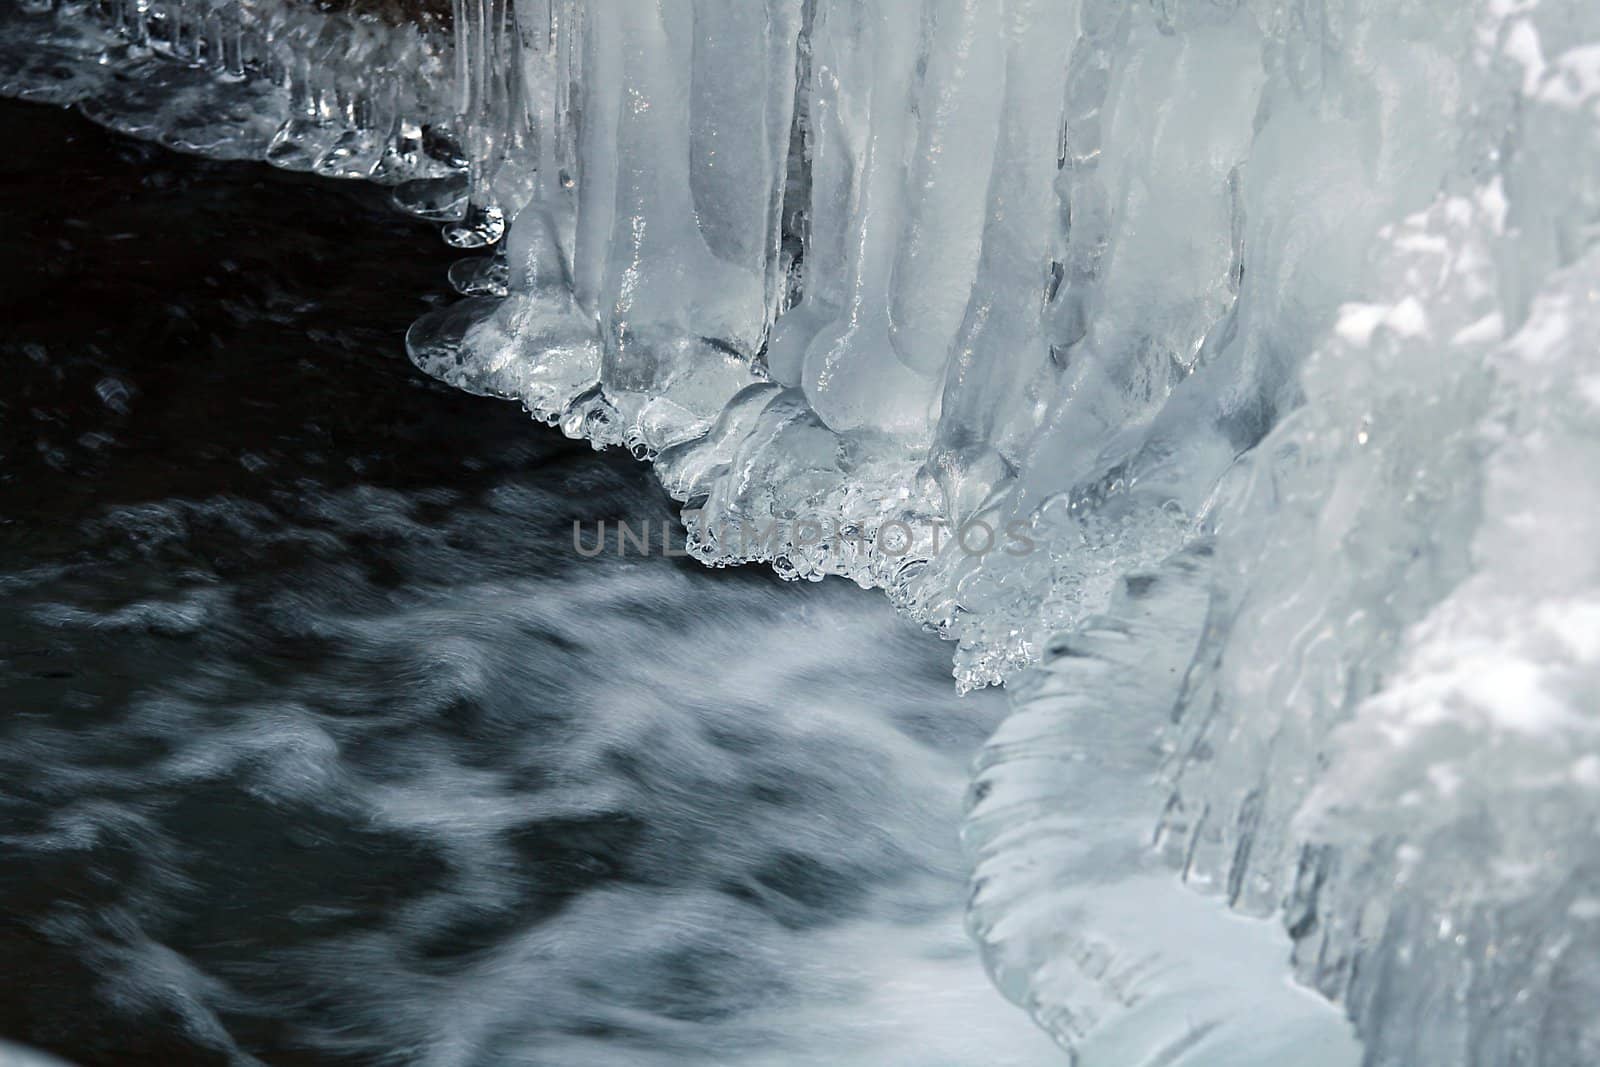 Detail view of ice formations in a river